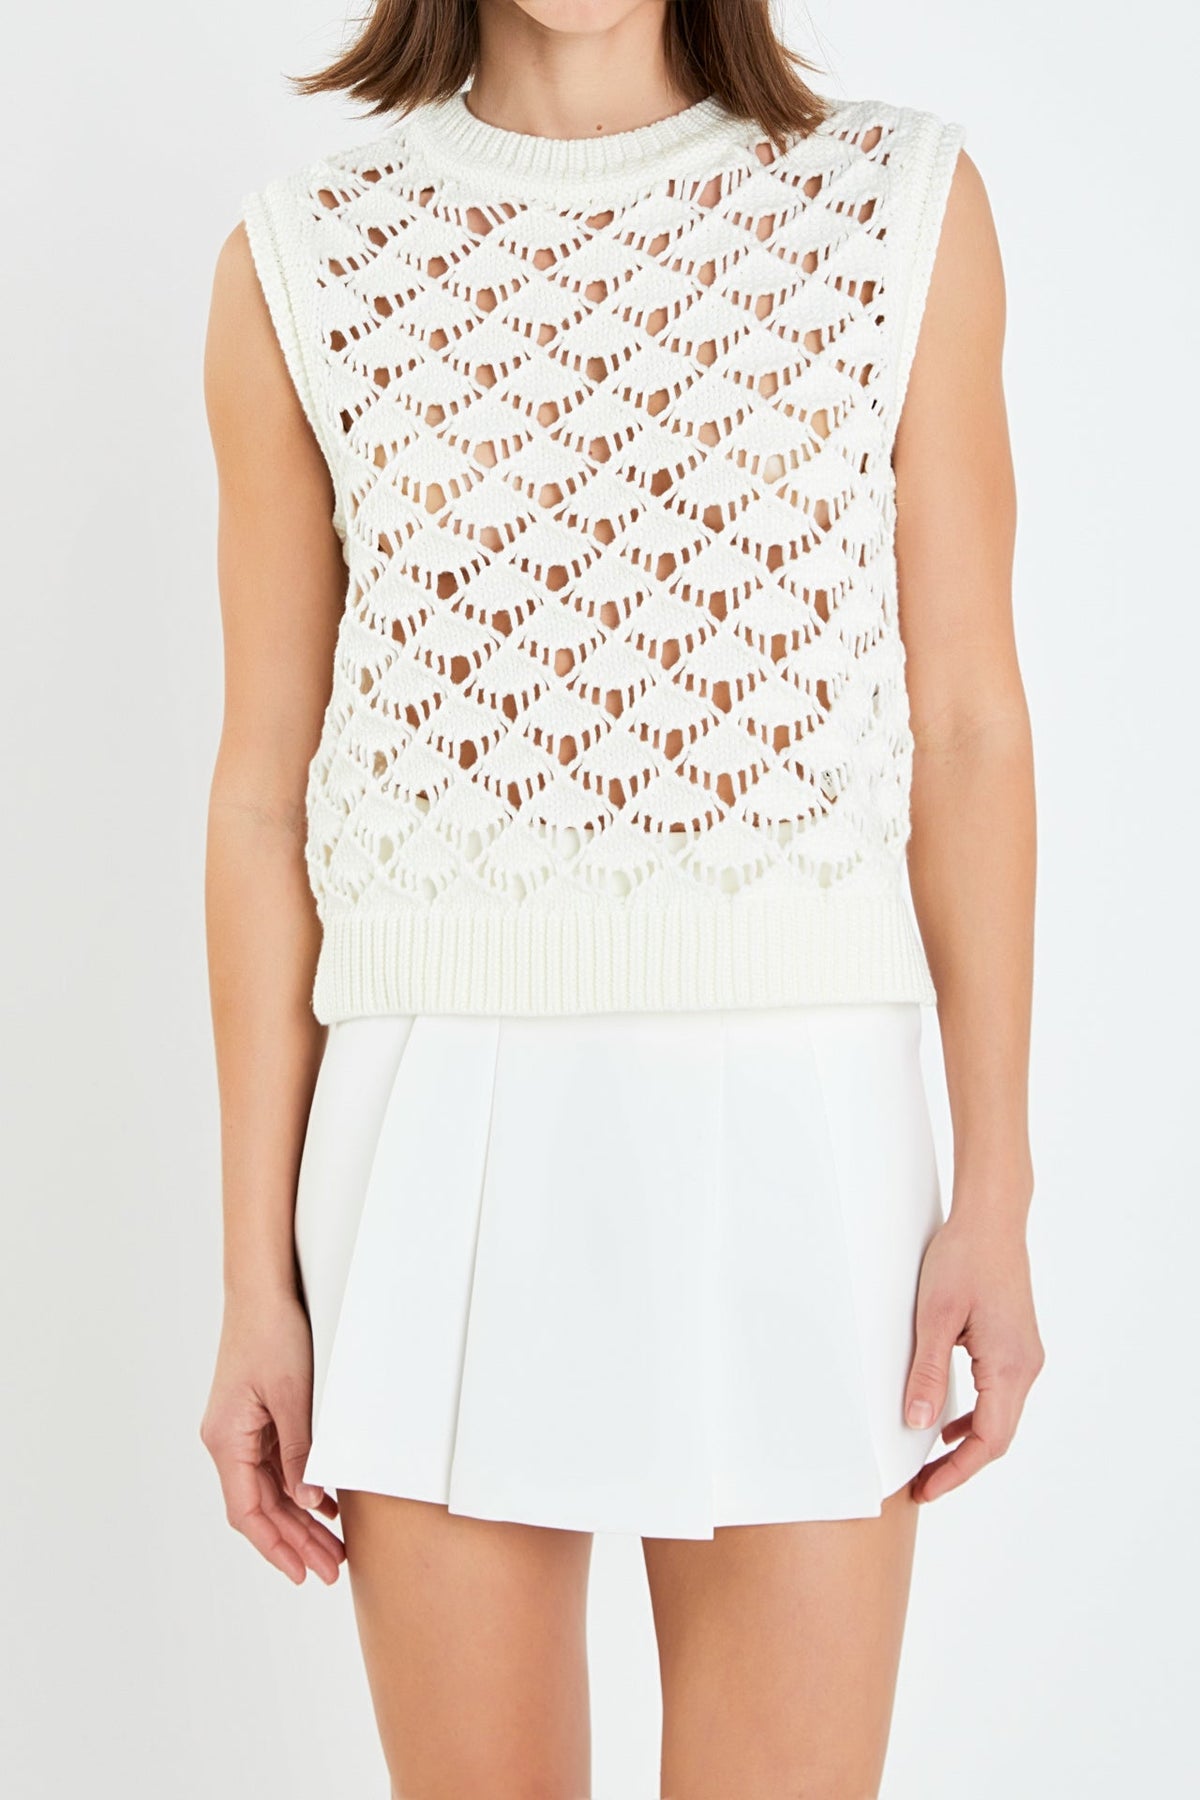 ENGLISH FACTORY - Crochet Vest Top - TOPS available at Objectrare